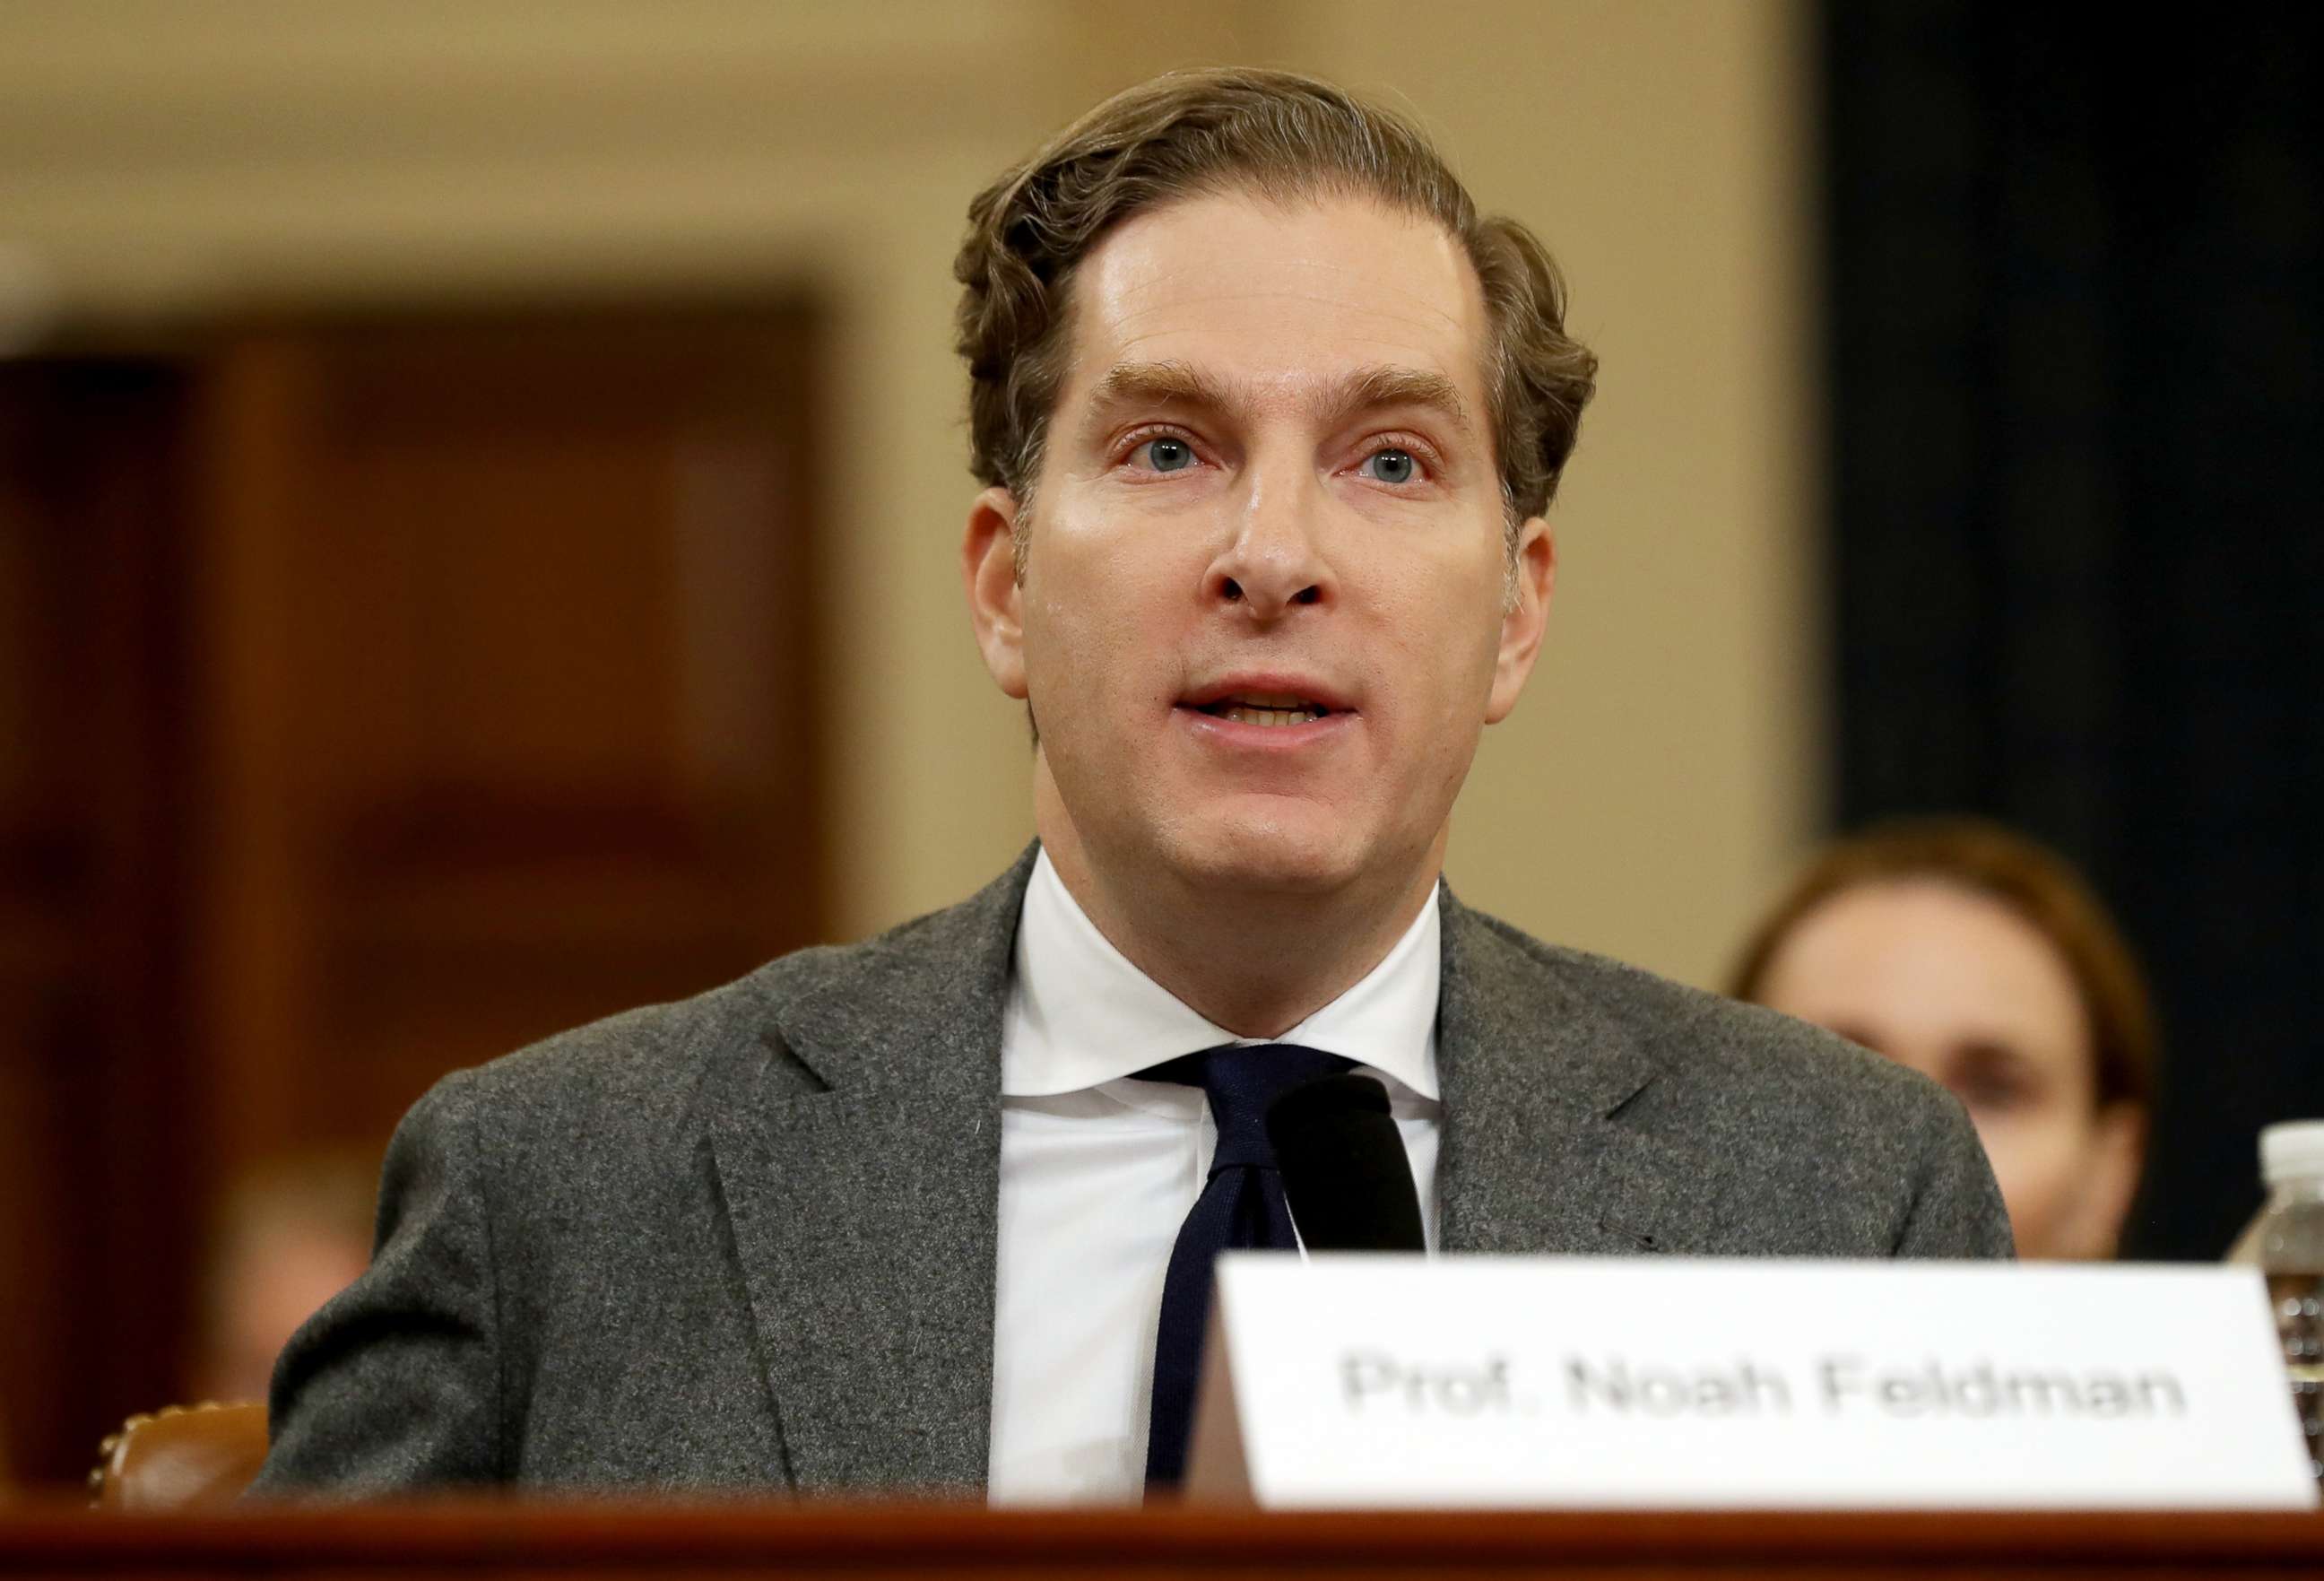 PHOTO: Constitutional scholar Noah Feldman of Harvard University testifies before the House Judiciary Committee in the Longworth House Office Building on Capitol Hill, Dec. 4, 2019, in Washington.